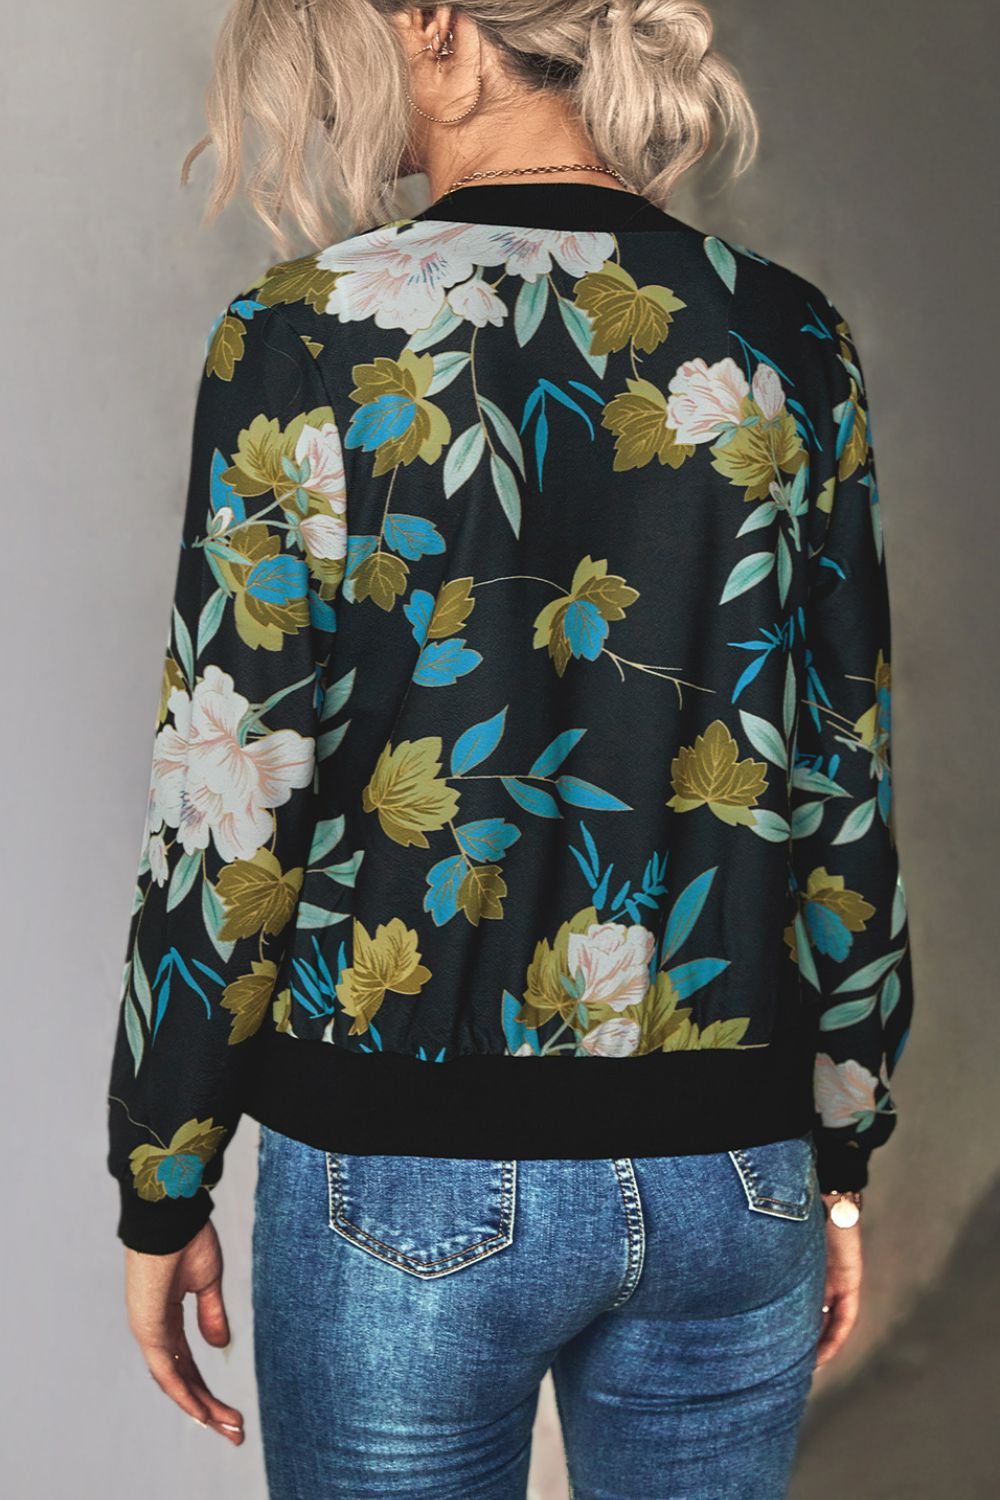 The back view of a Woman wearing a black floral zip up lightweight floral bomber jacket with jeans